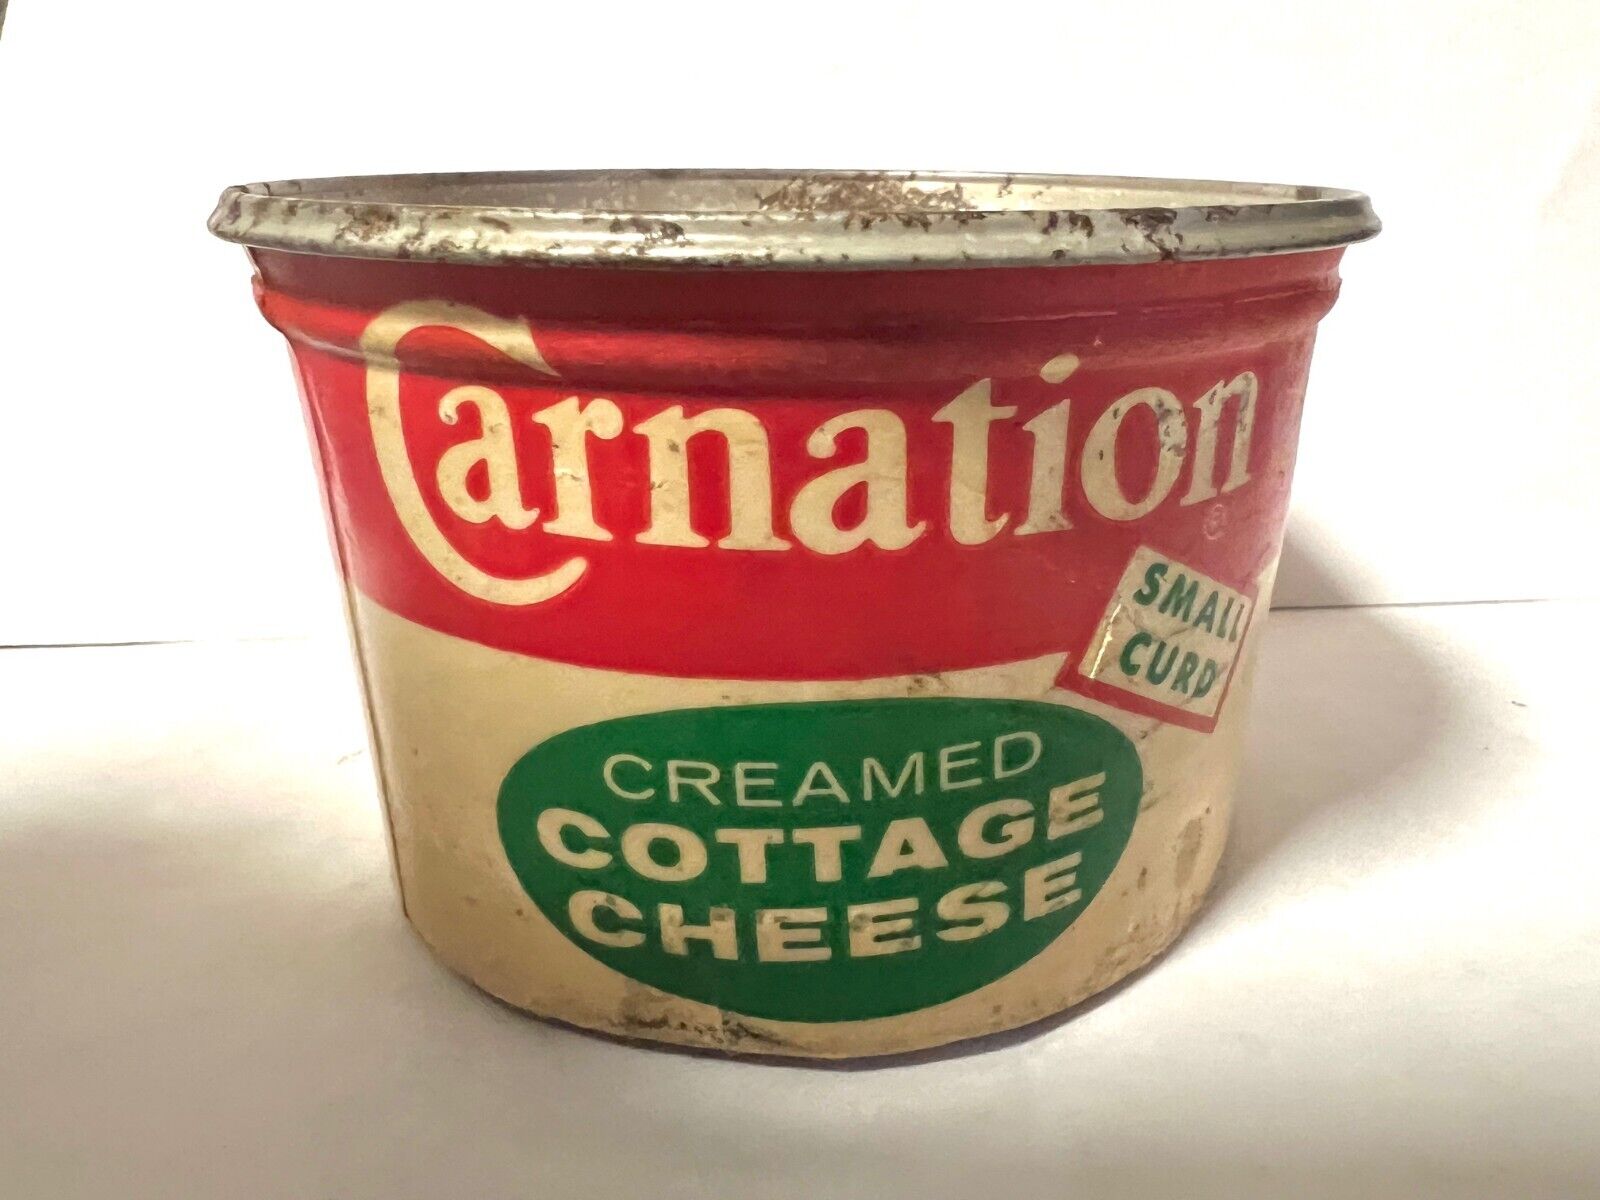 Vintage Antique Carnation Small Curd Creamed Cottage Cheese 1/2 Pint Container 